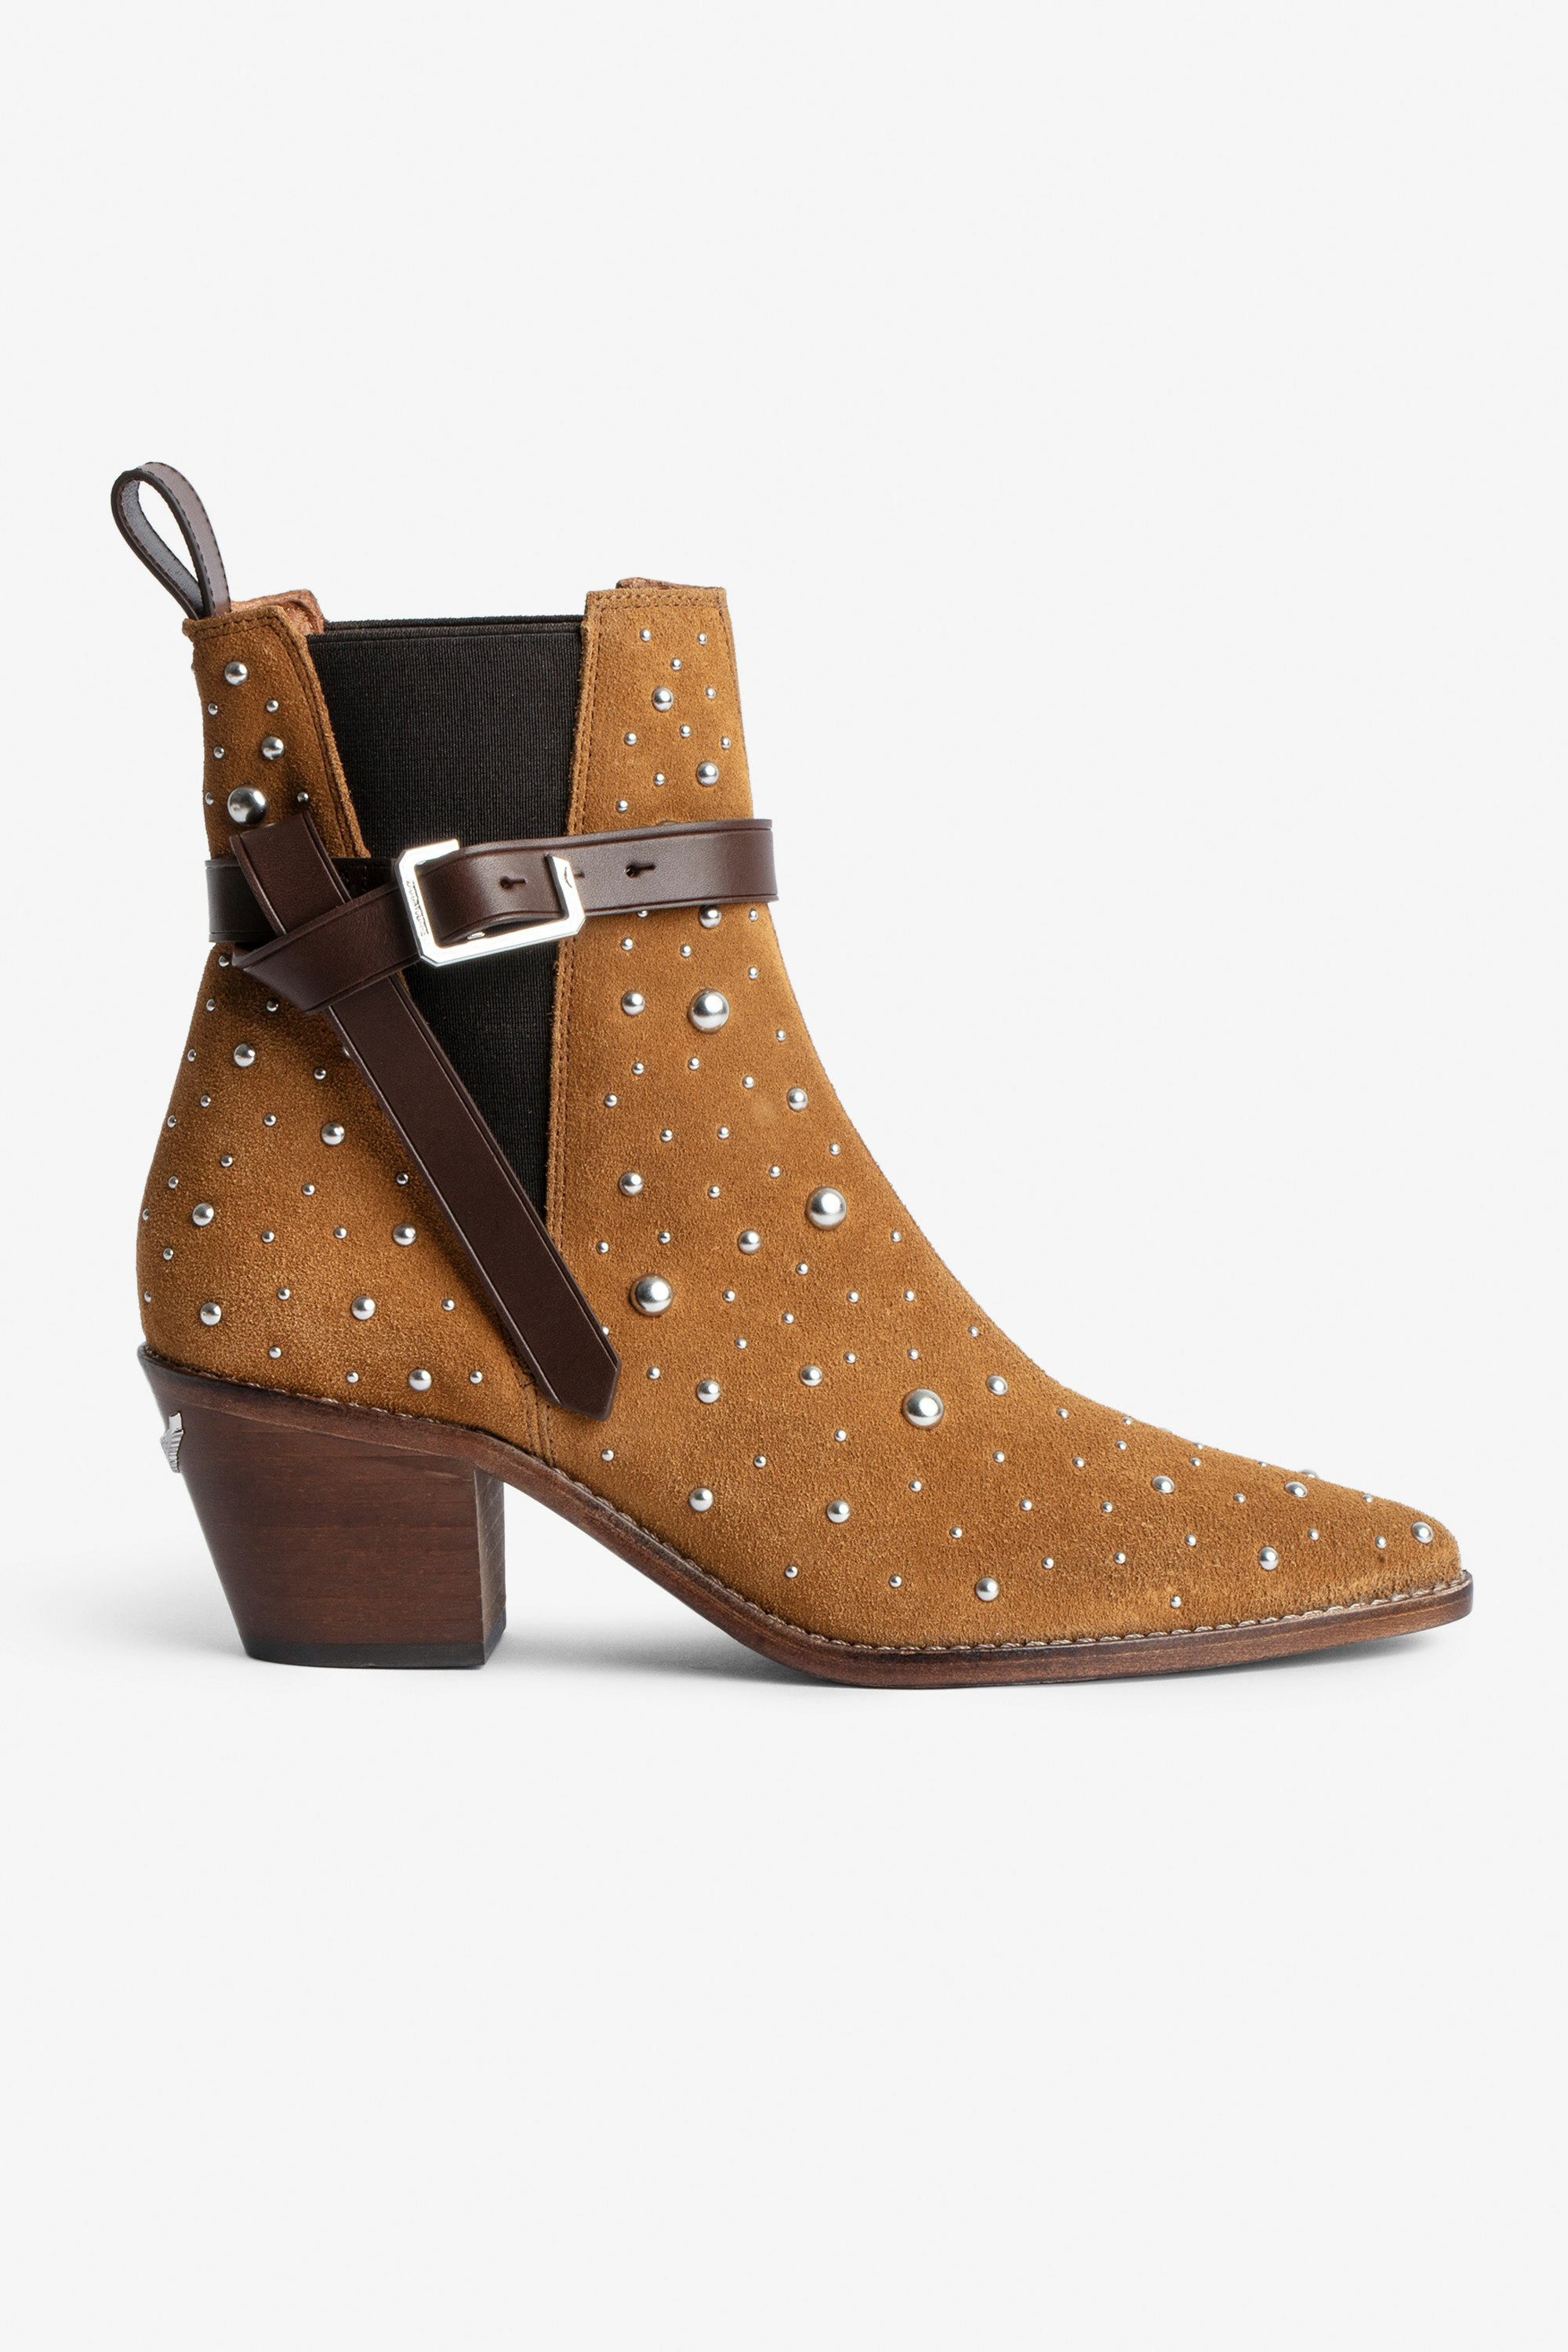 Tyler Ankle Boots Women's brown suede boots with all-over studs